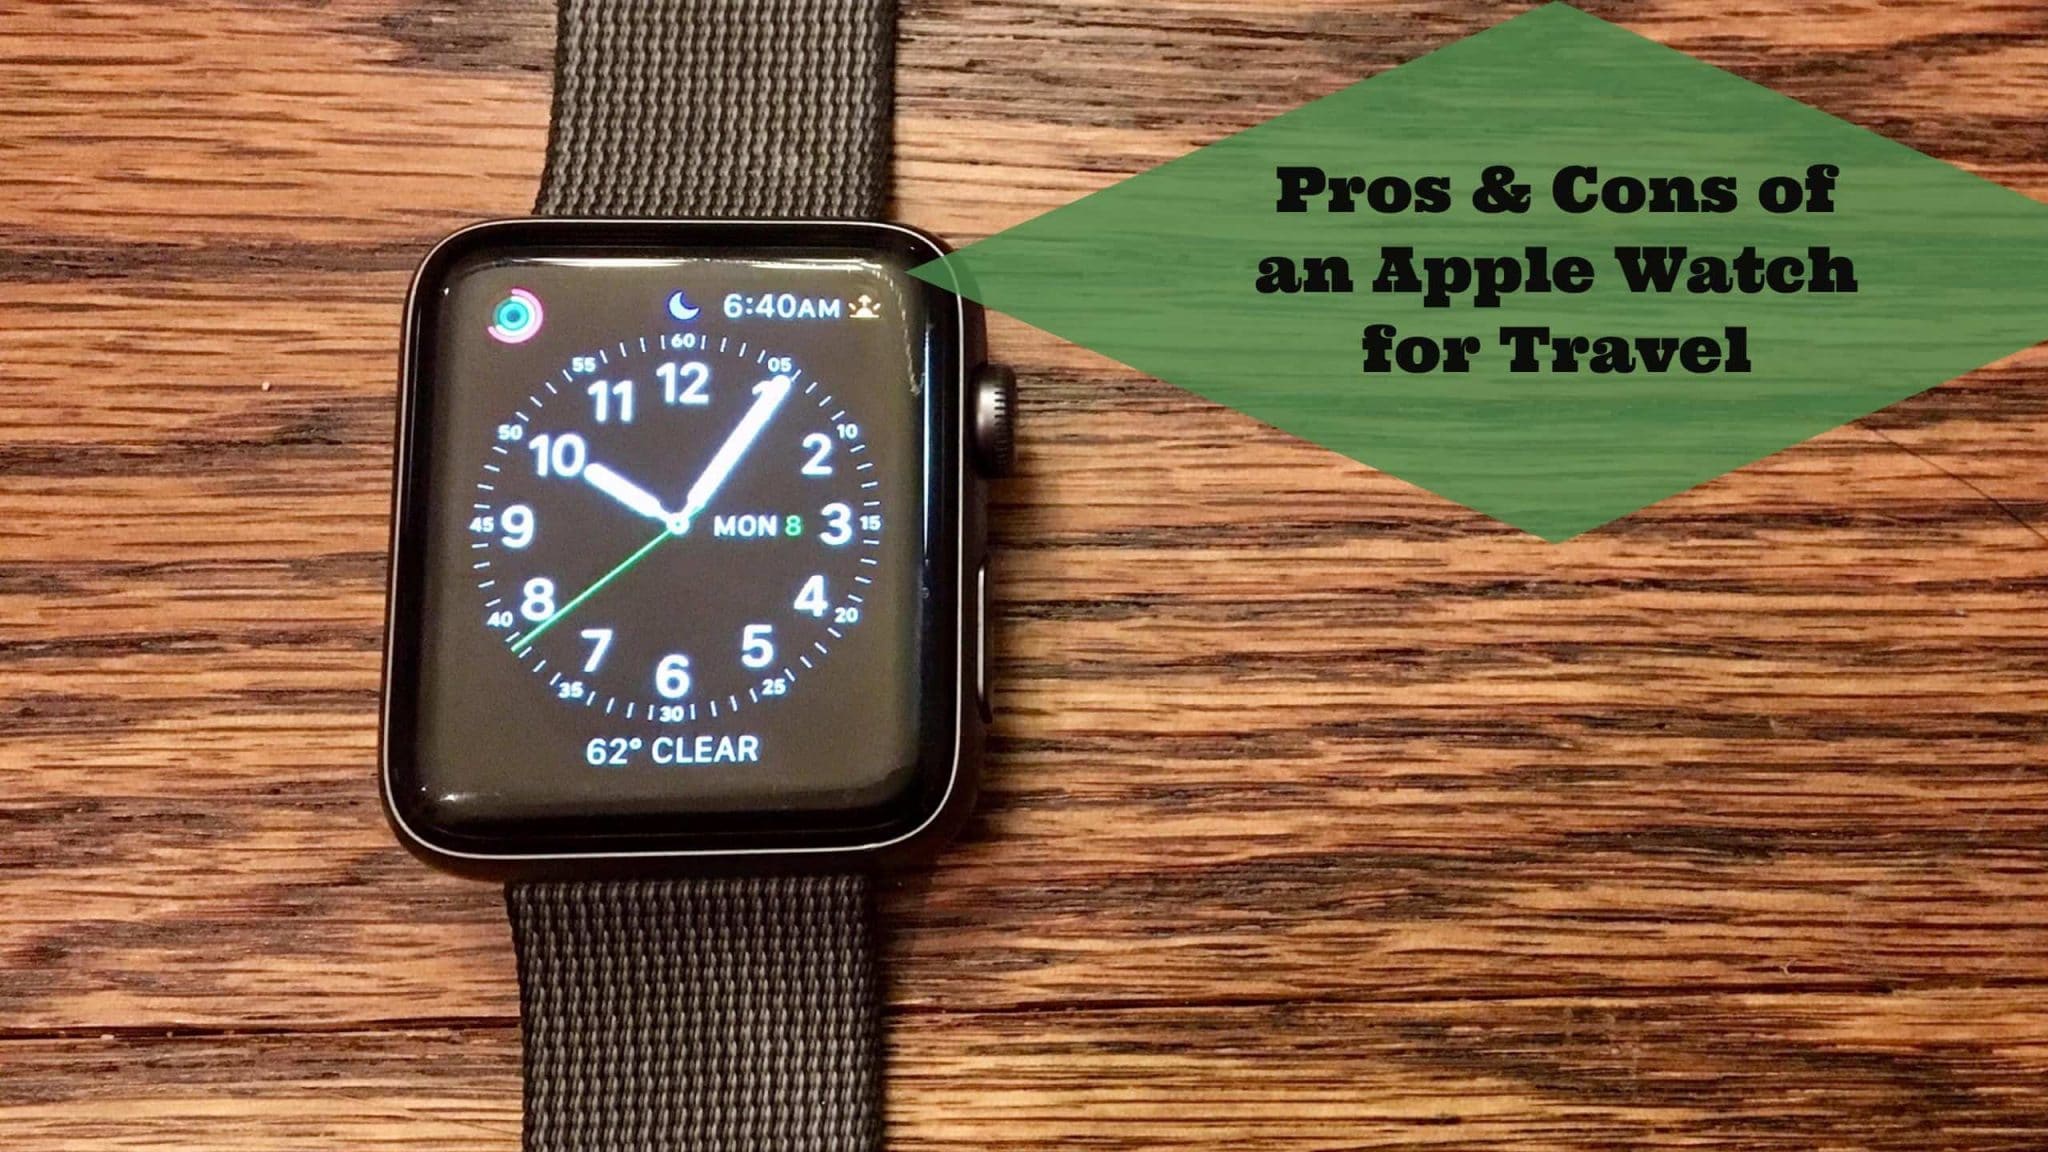 Pros & Cons of an Apple Watch for Travel